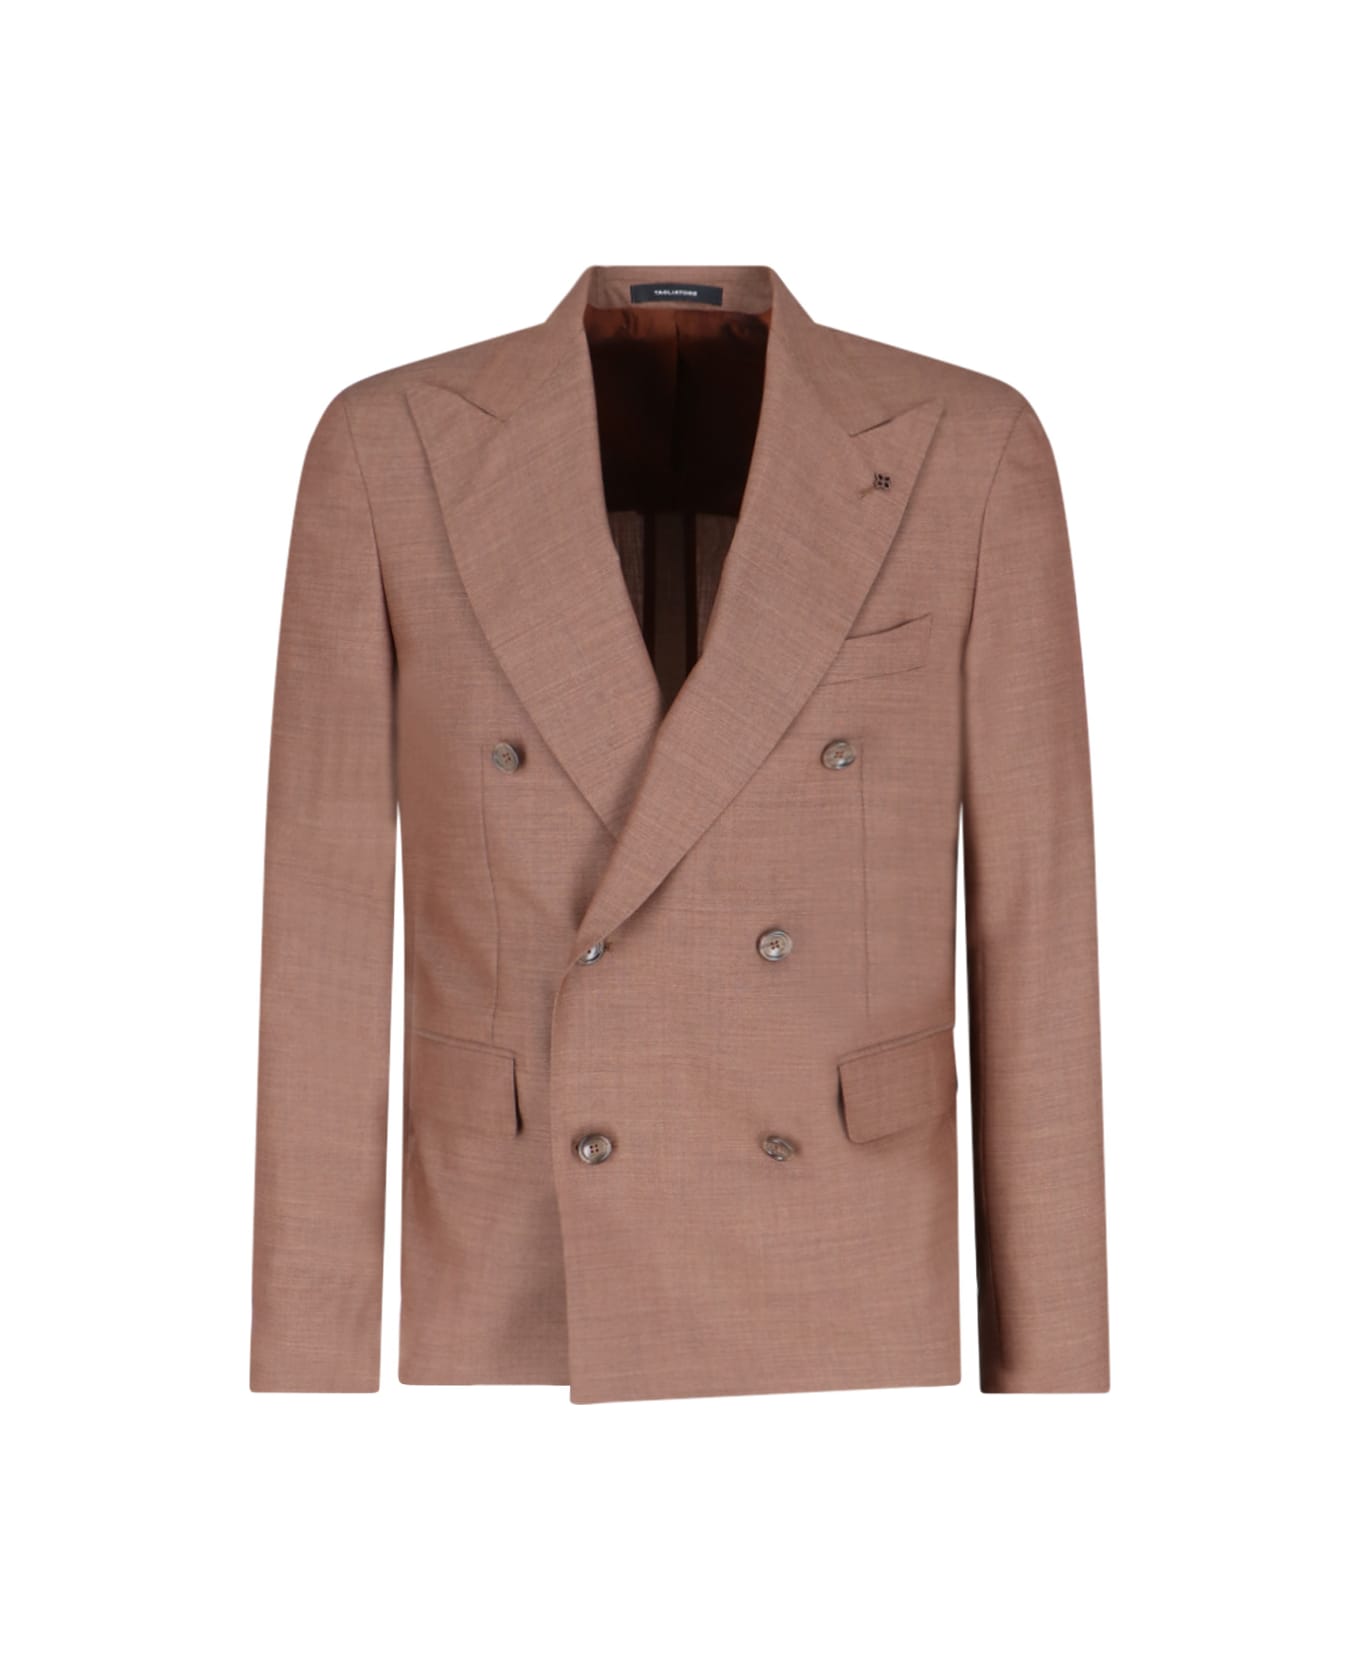 Tagliatore Double-breasted Suit - K1070